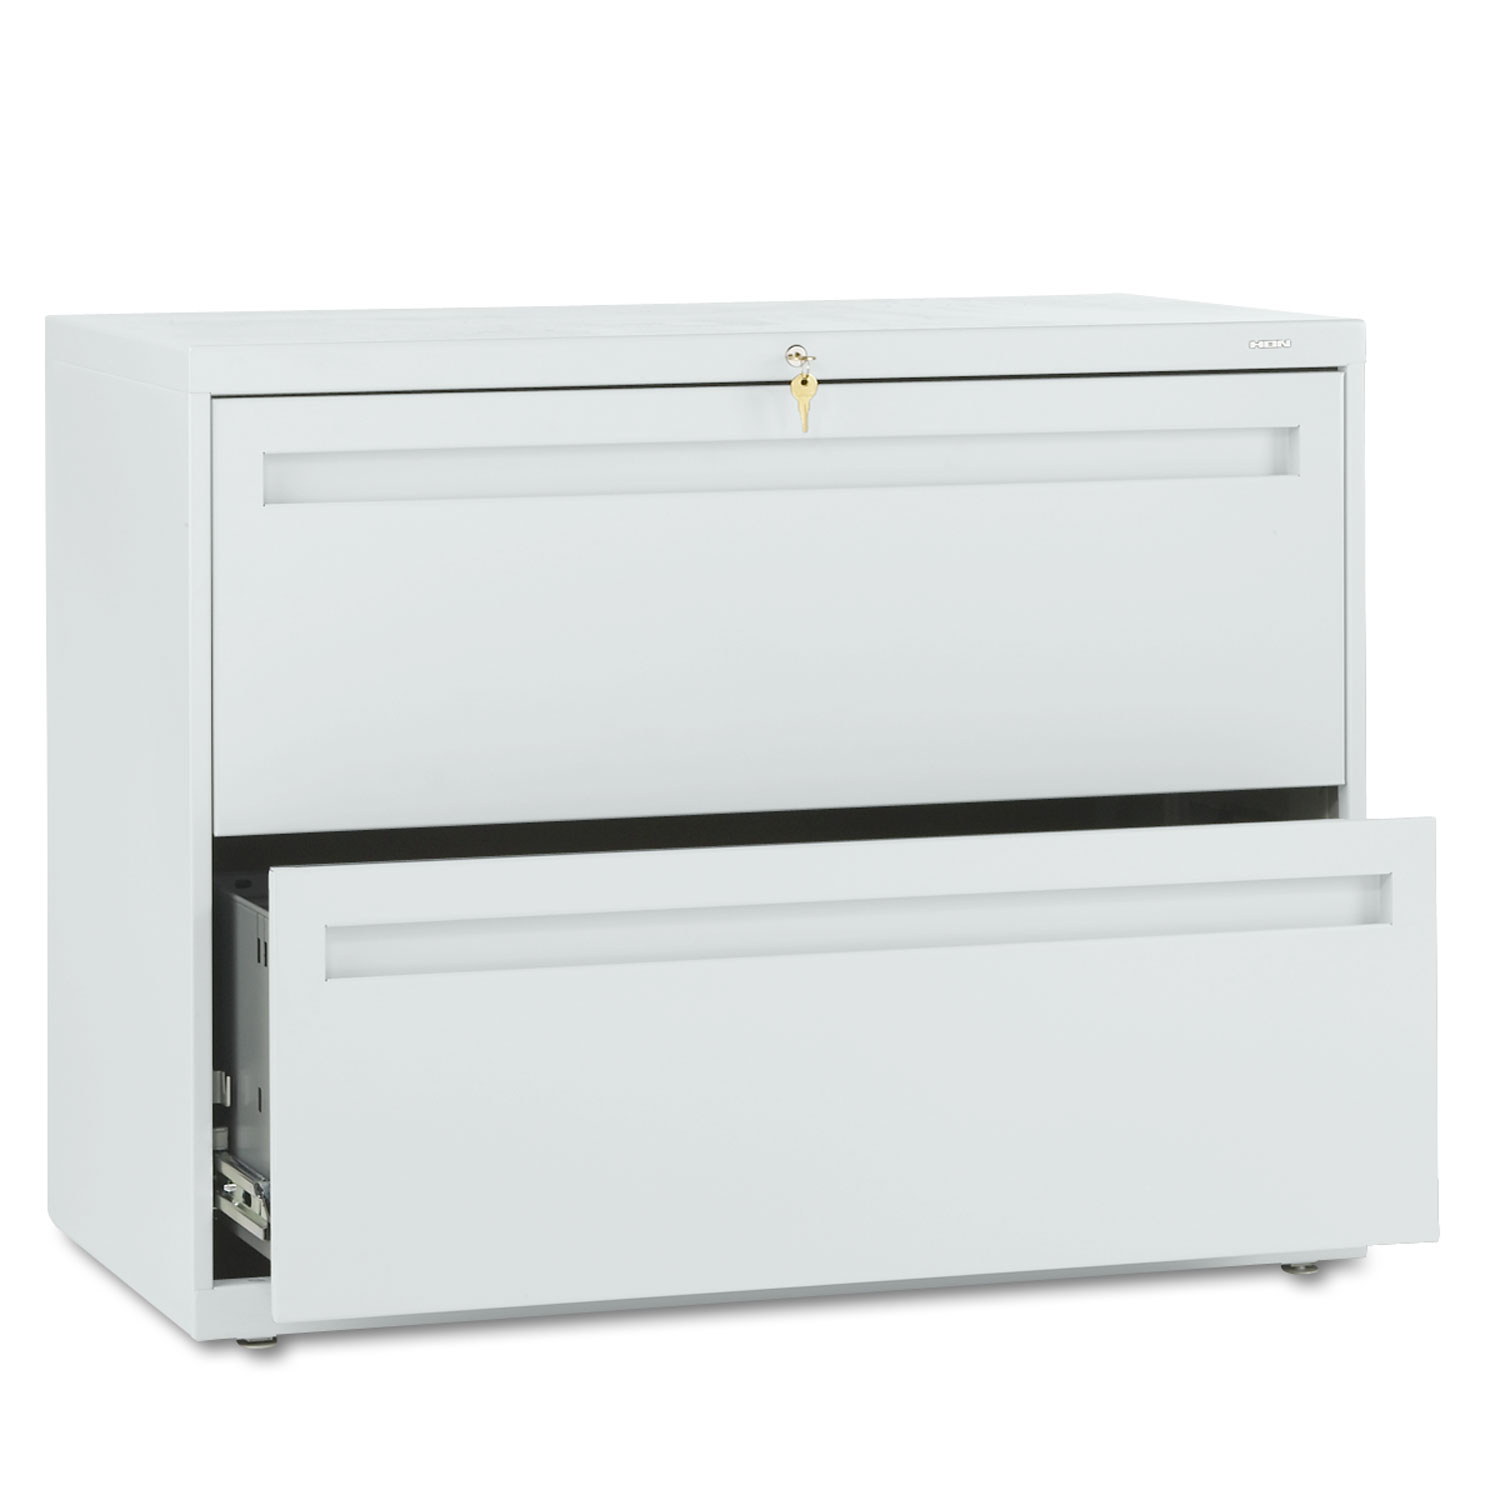 700 Series Two-Drawer Lateral File, 36w x 19-1/4d, Light Gray